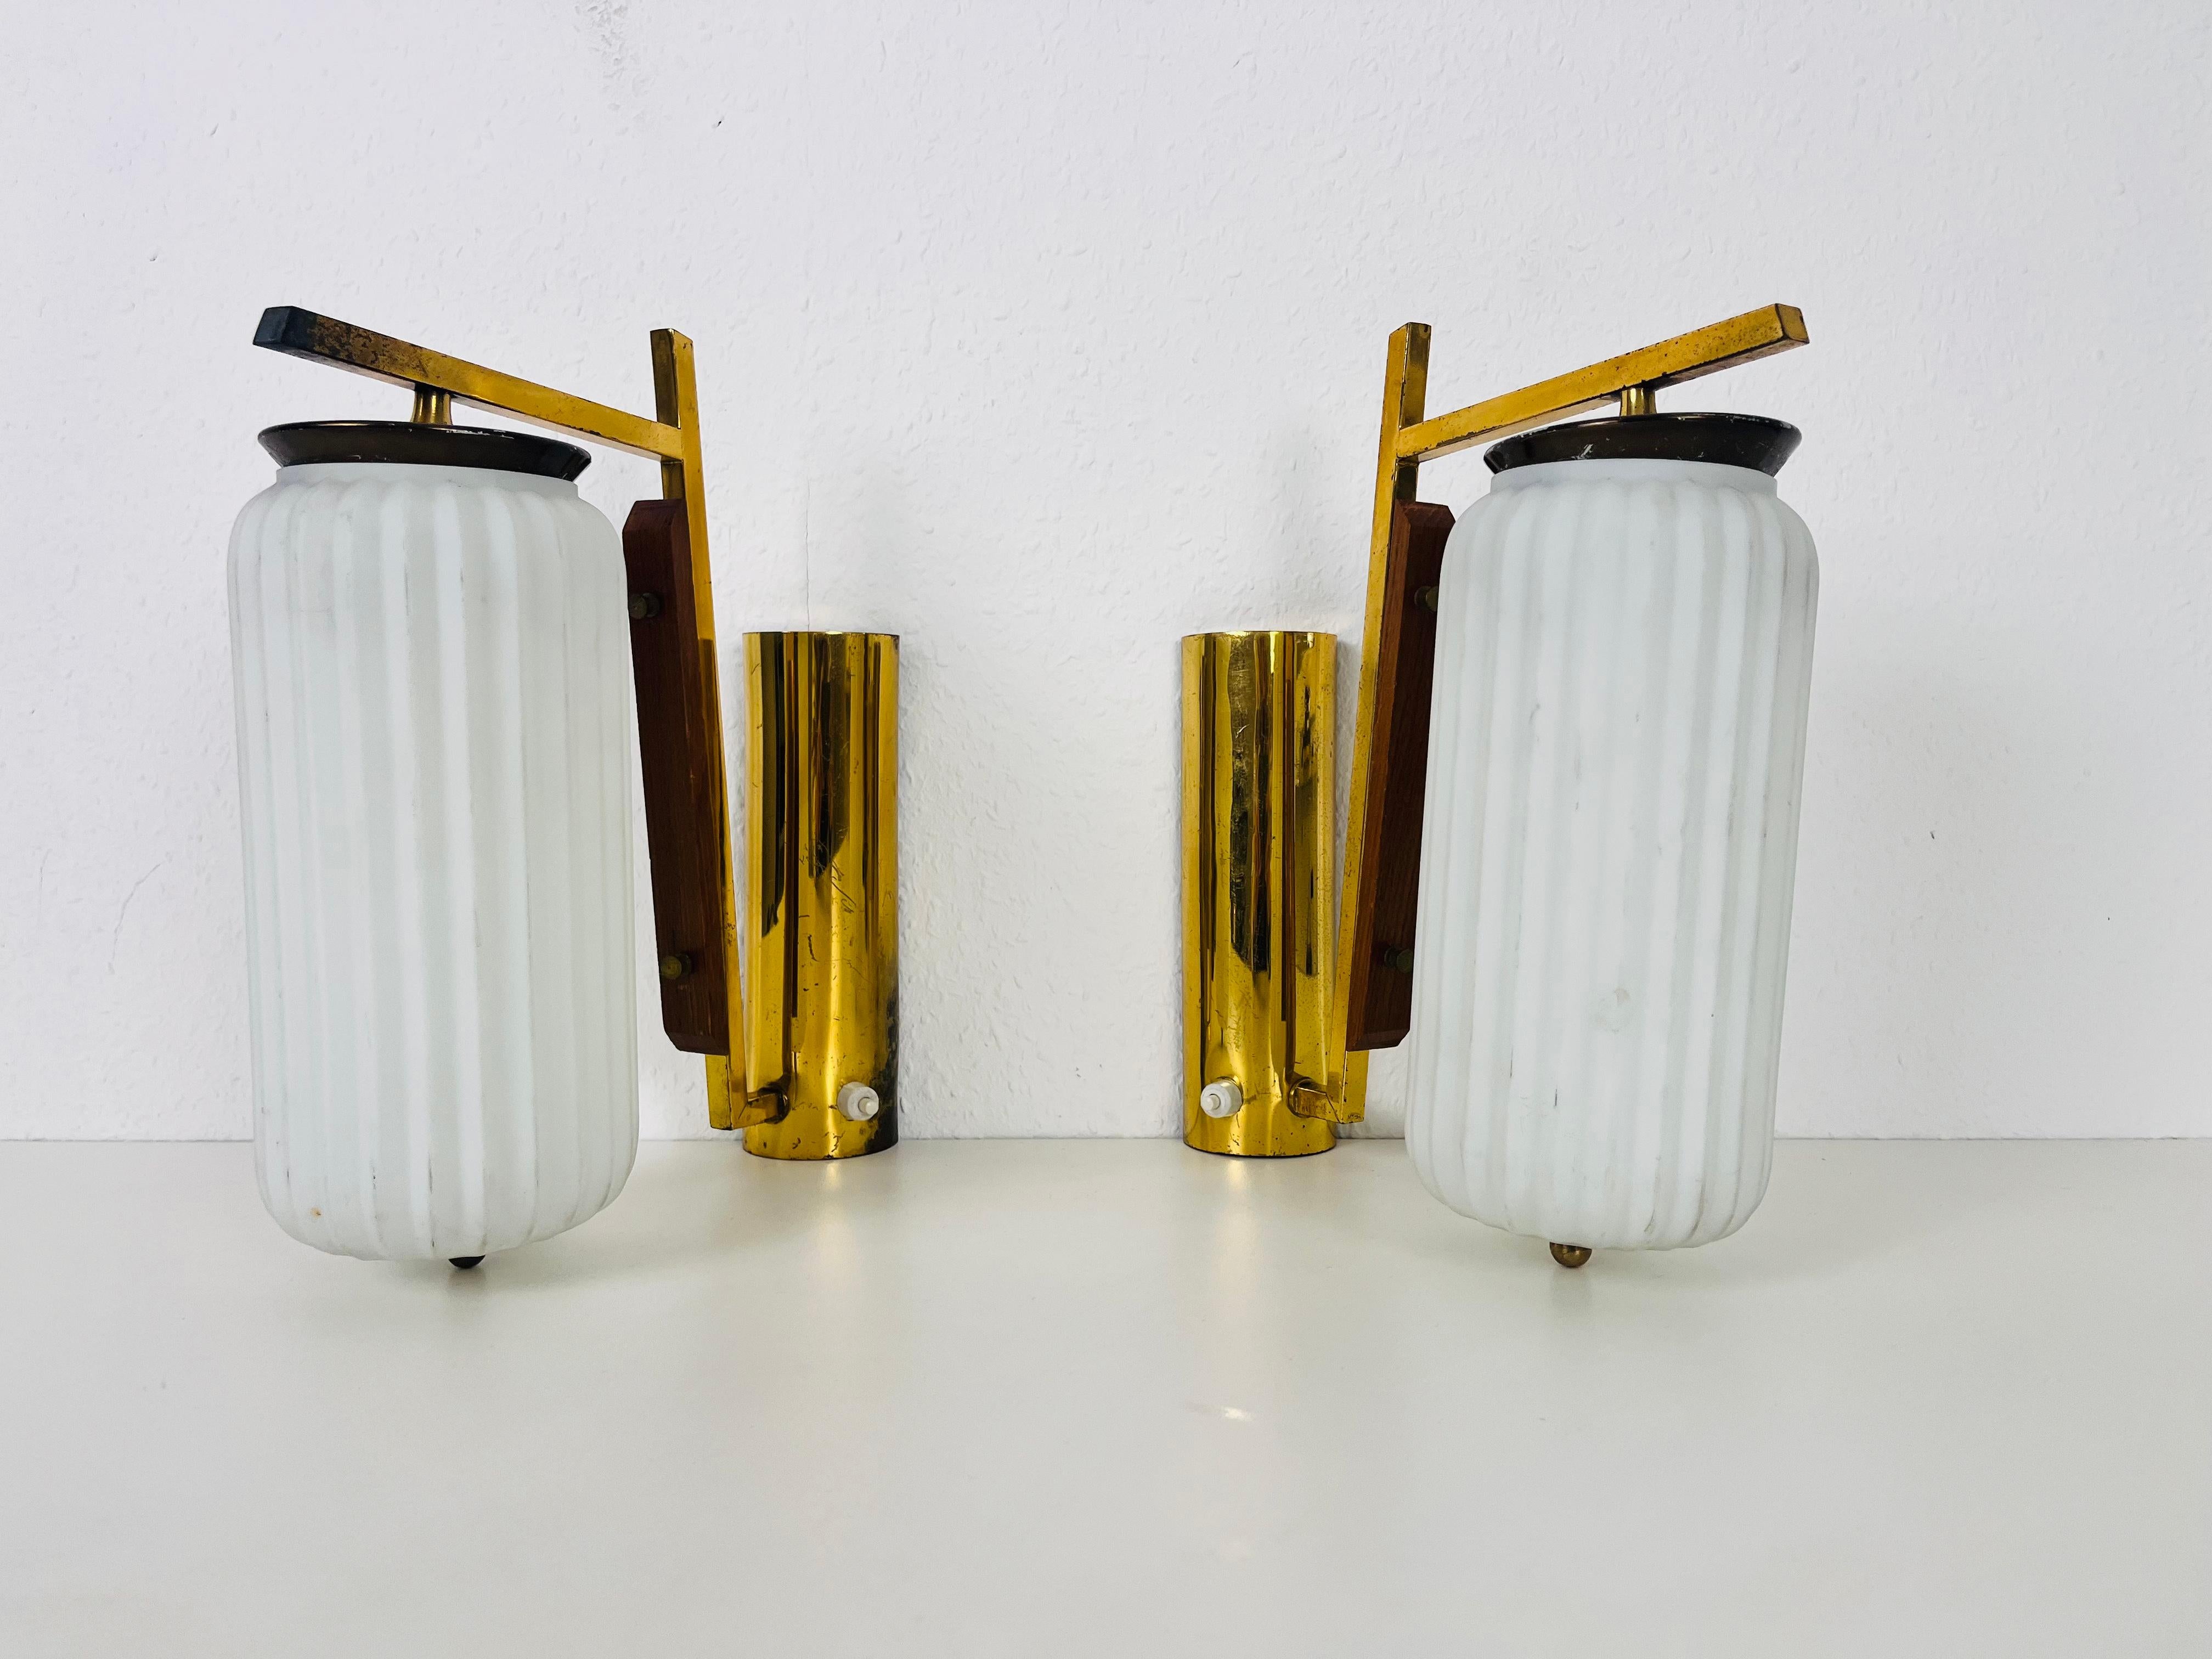 A pair of Italian Stilnovo wall lamps made in the 1960s. It is fascinating with its rare opaline glass shade. The body of the lamp is made of brass 

The lights require E14 light bulbs. Works with both 120/220V. Very good vintage